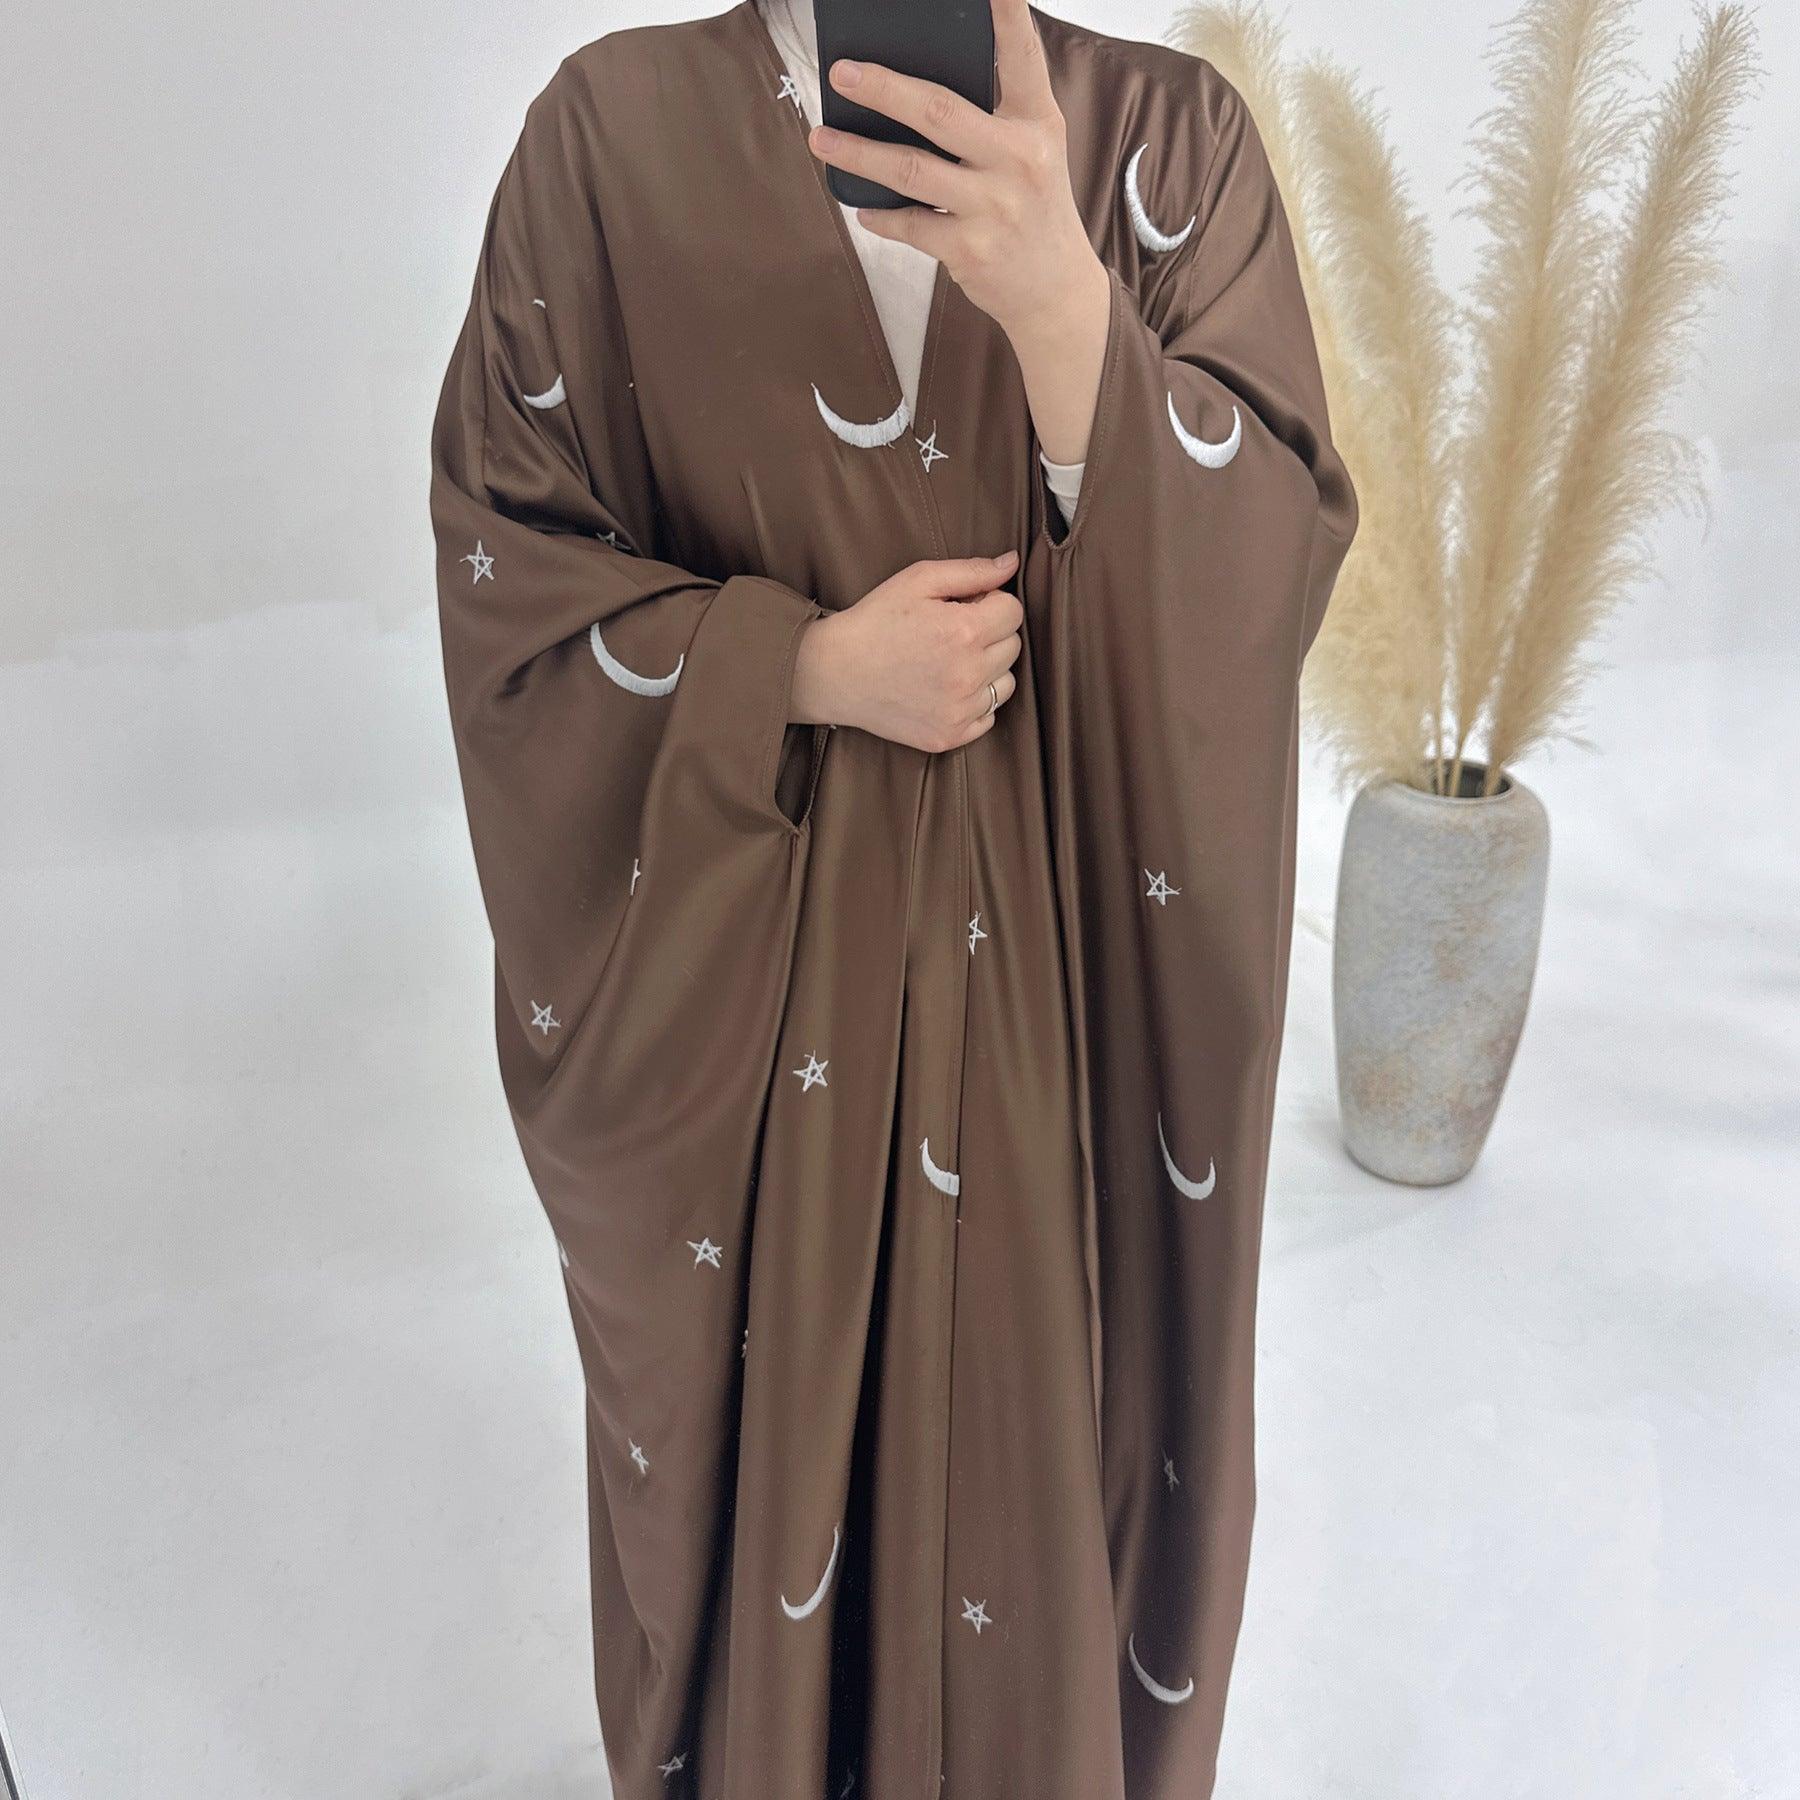 MOA043 Eid Abaya Design Moon and Star Embroidery Open Abaya - Mariam's Collection